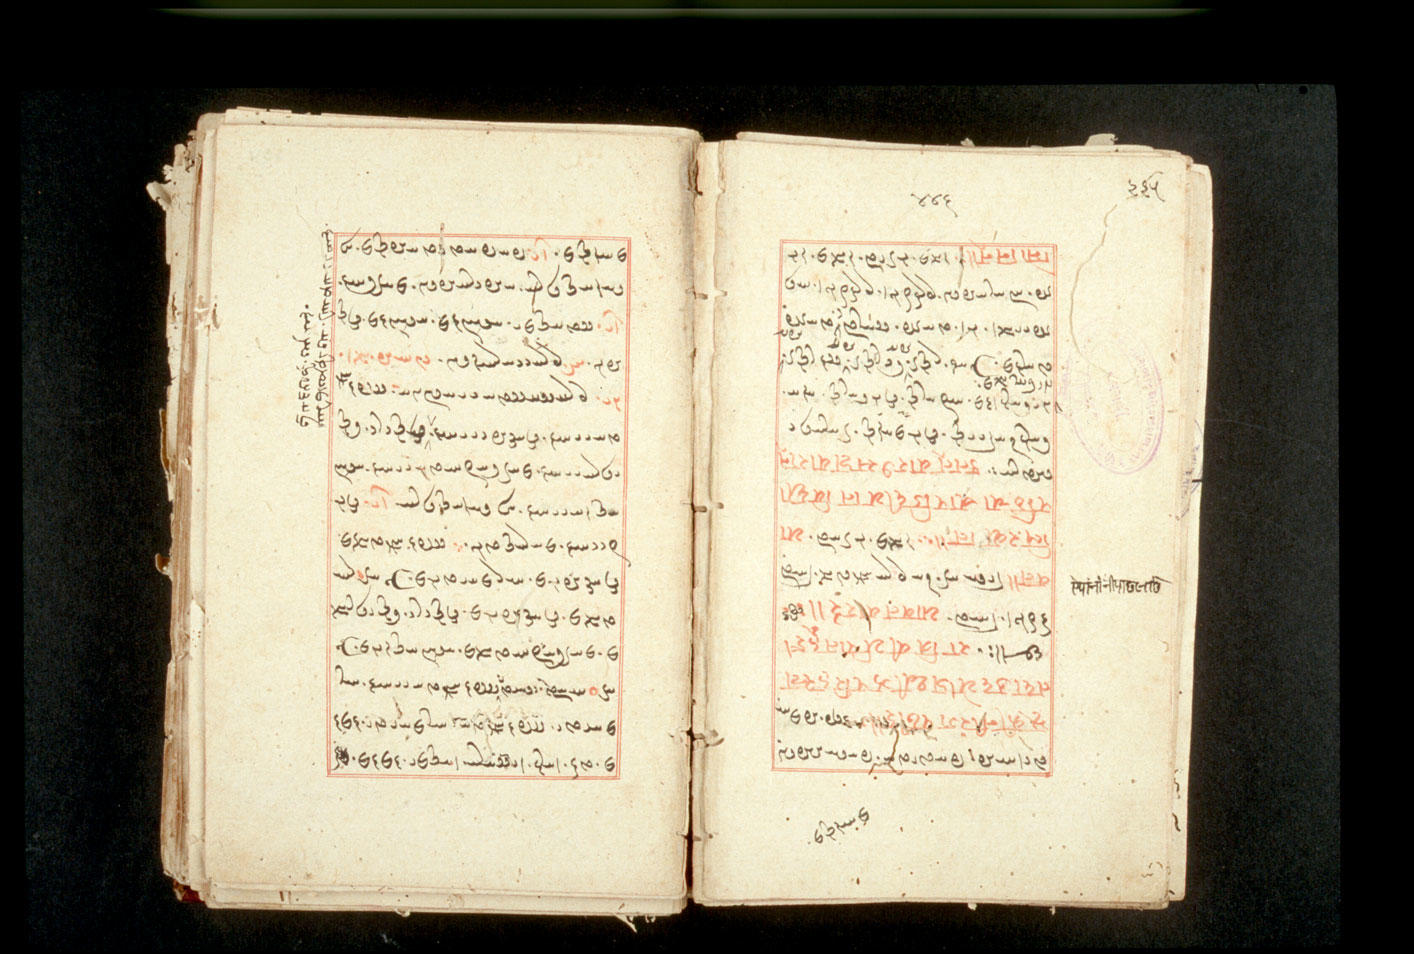 Folios 446v (right) and 447r (left)